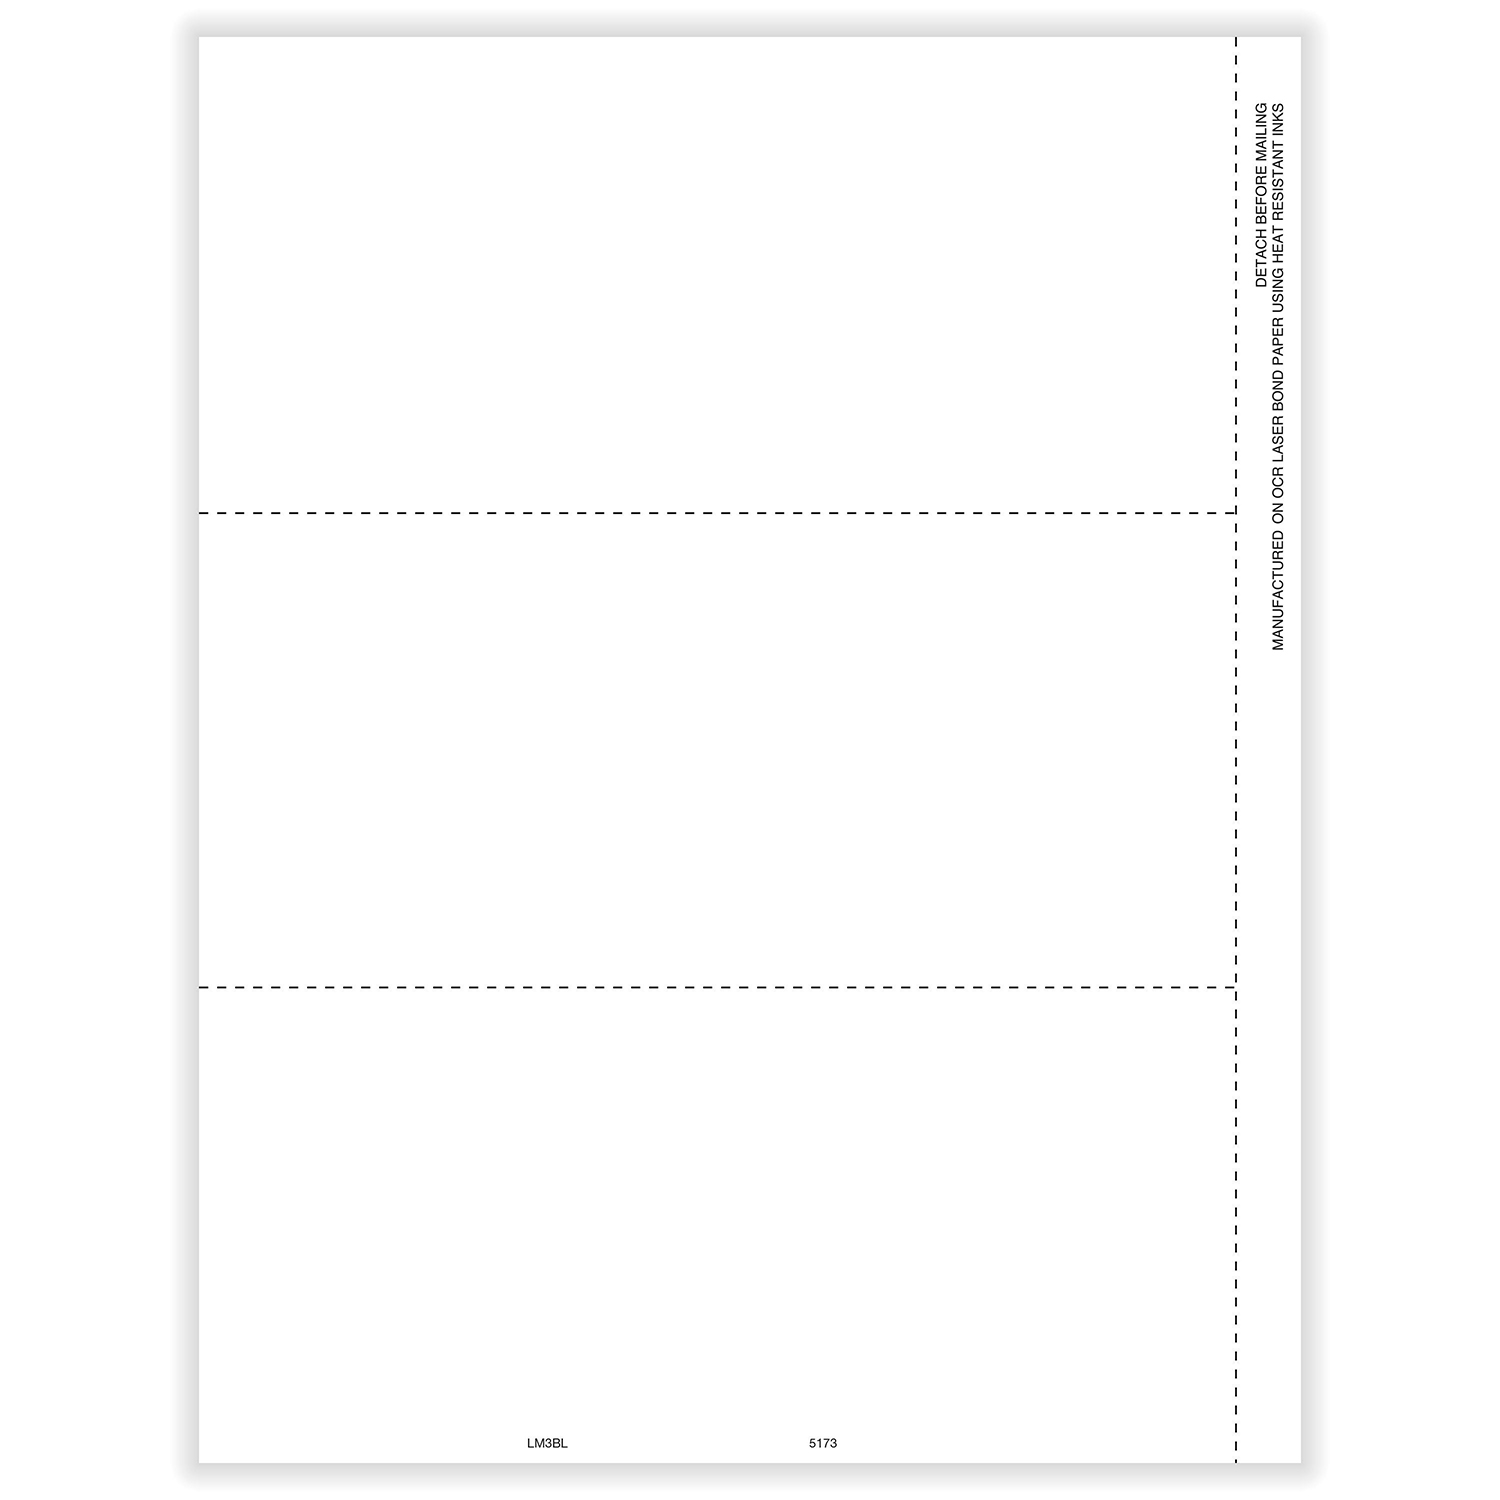 Picture of 1099-MISC Blank, Copy B & C, 3-Up, w/ Backer